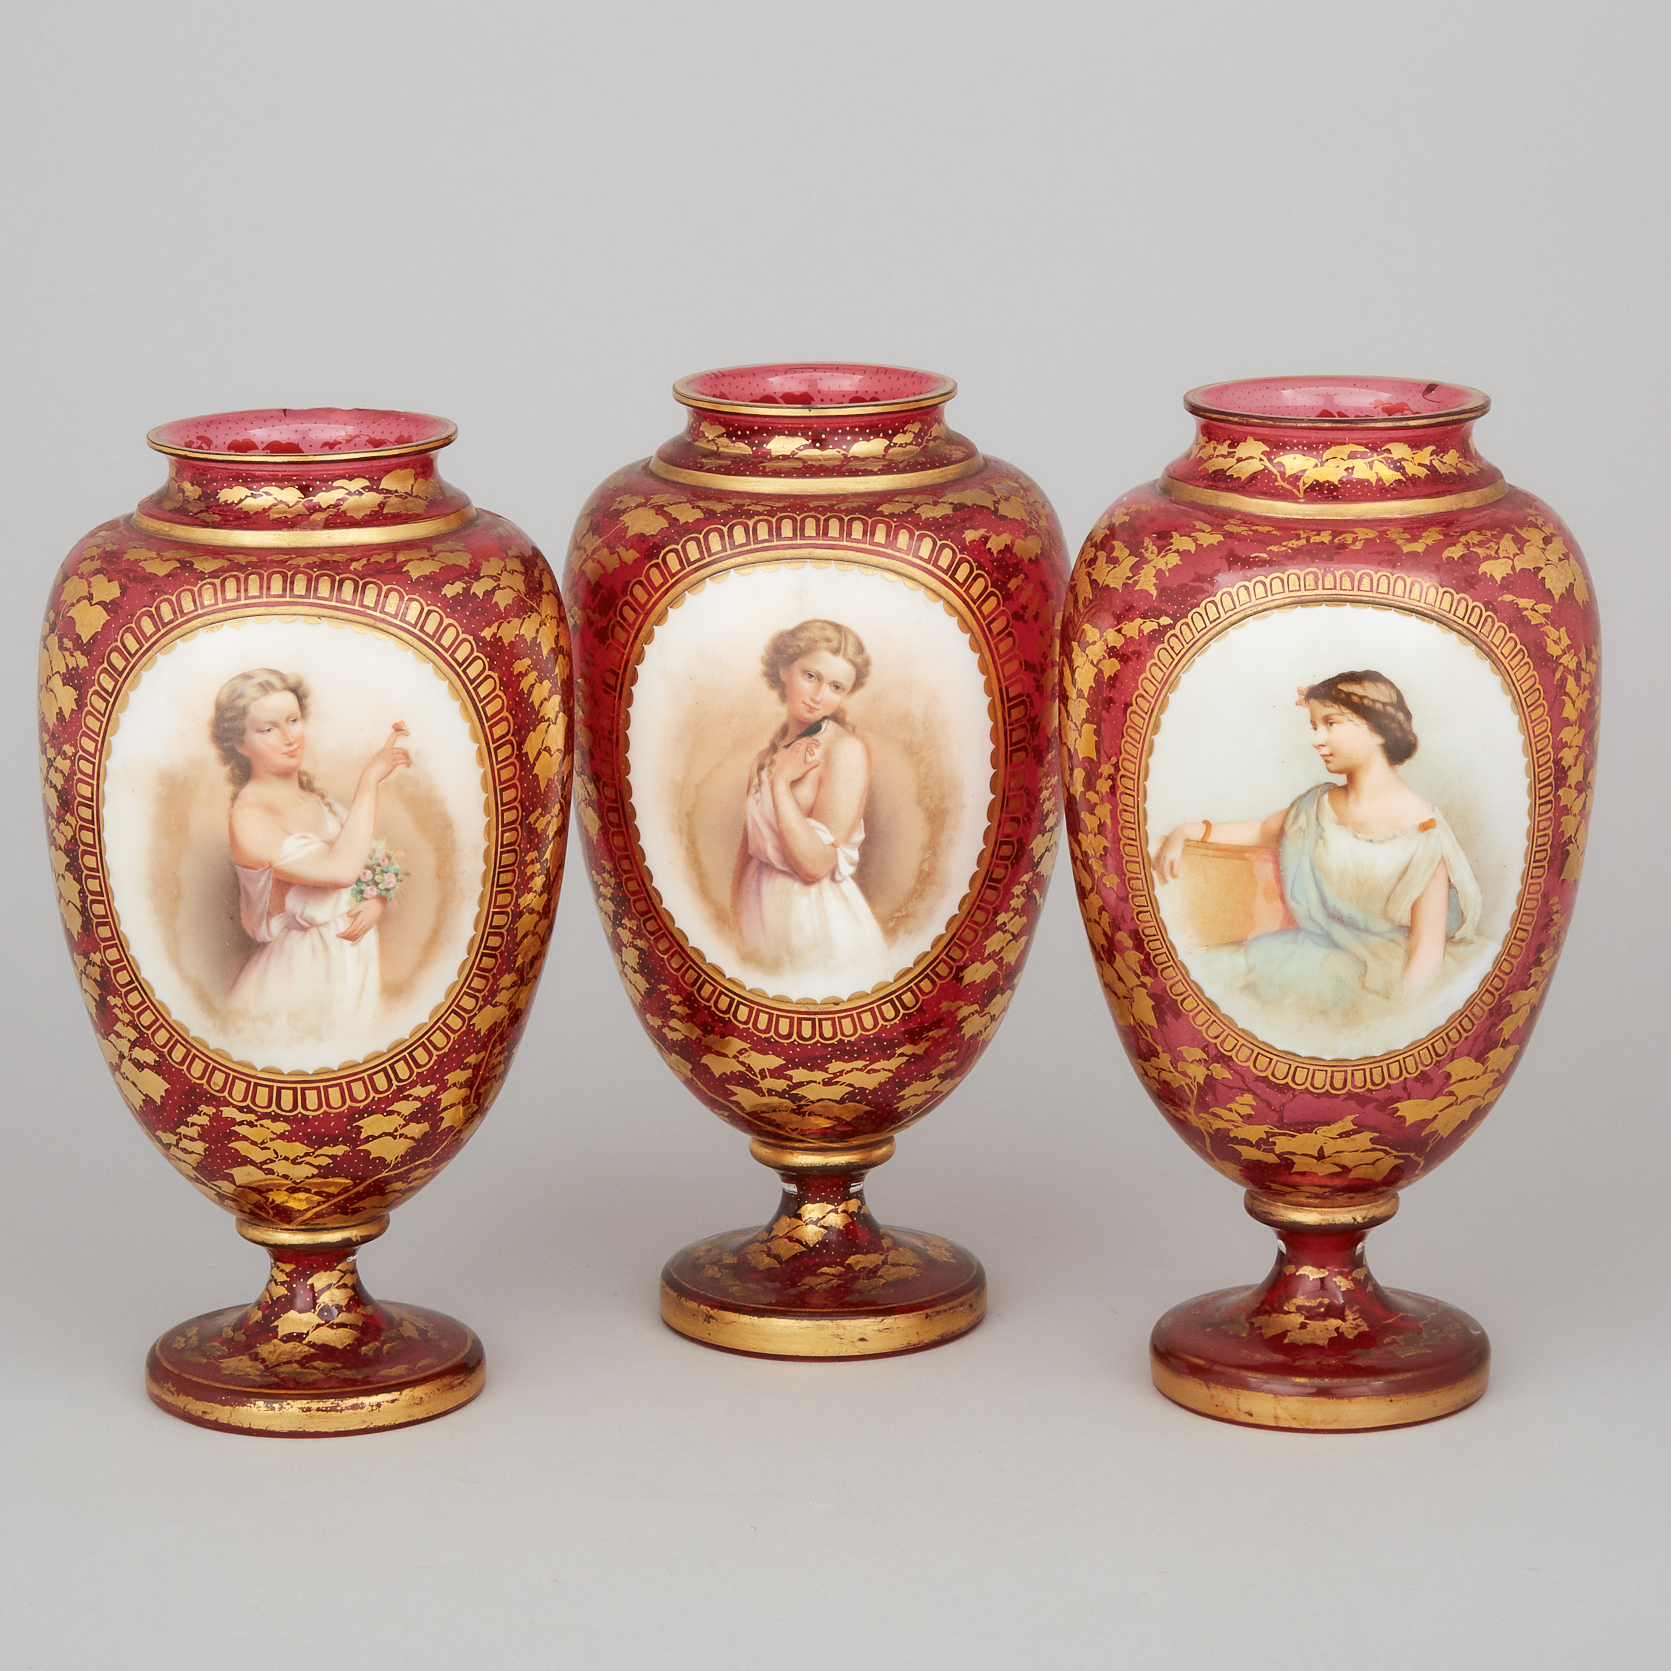 Bohemian Overlaid, Enameled and Gilt Red Glass Garniture of Three Portrait Vases, late 19th century